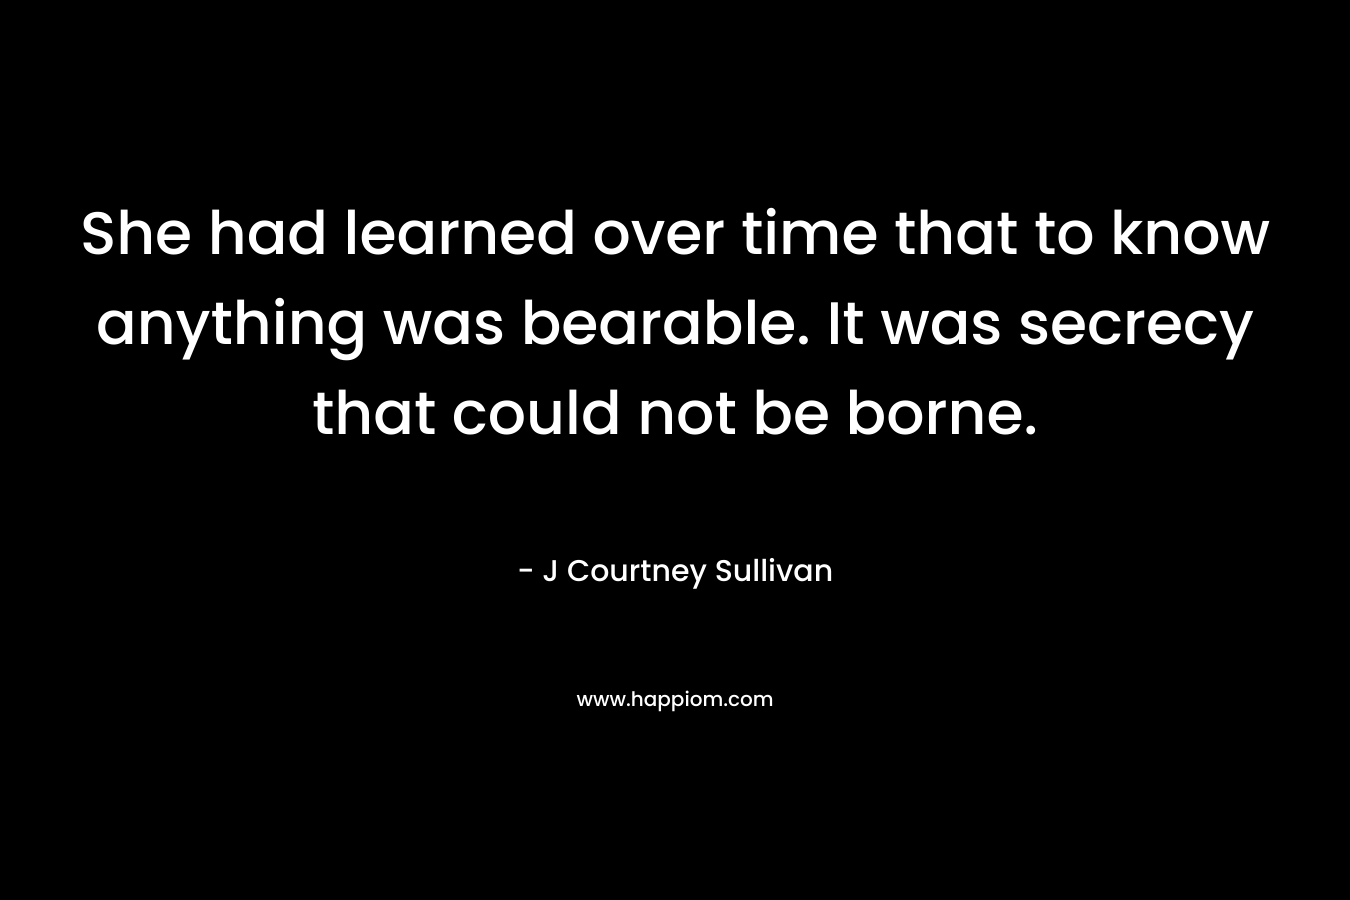 She had learned over time that to know anything was bearable. It was secrecy that could not be borne. – J Courtney Sullivan